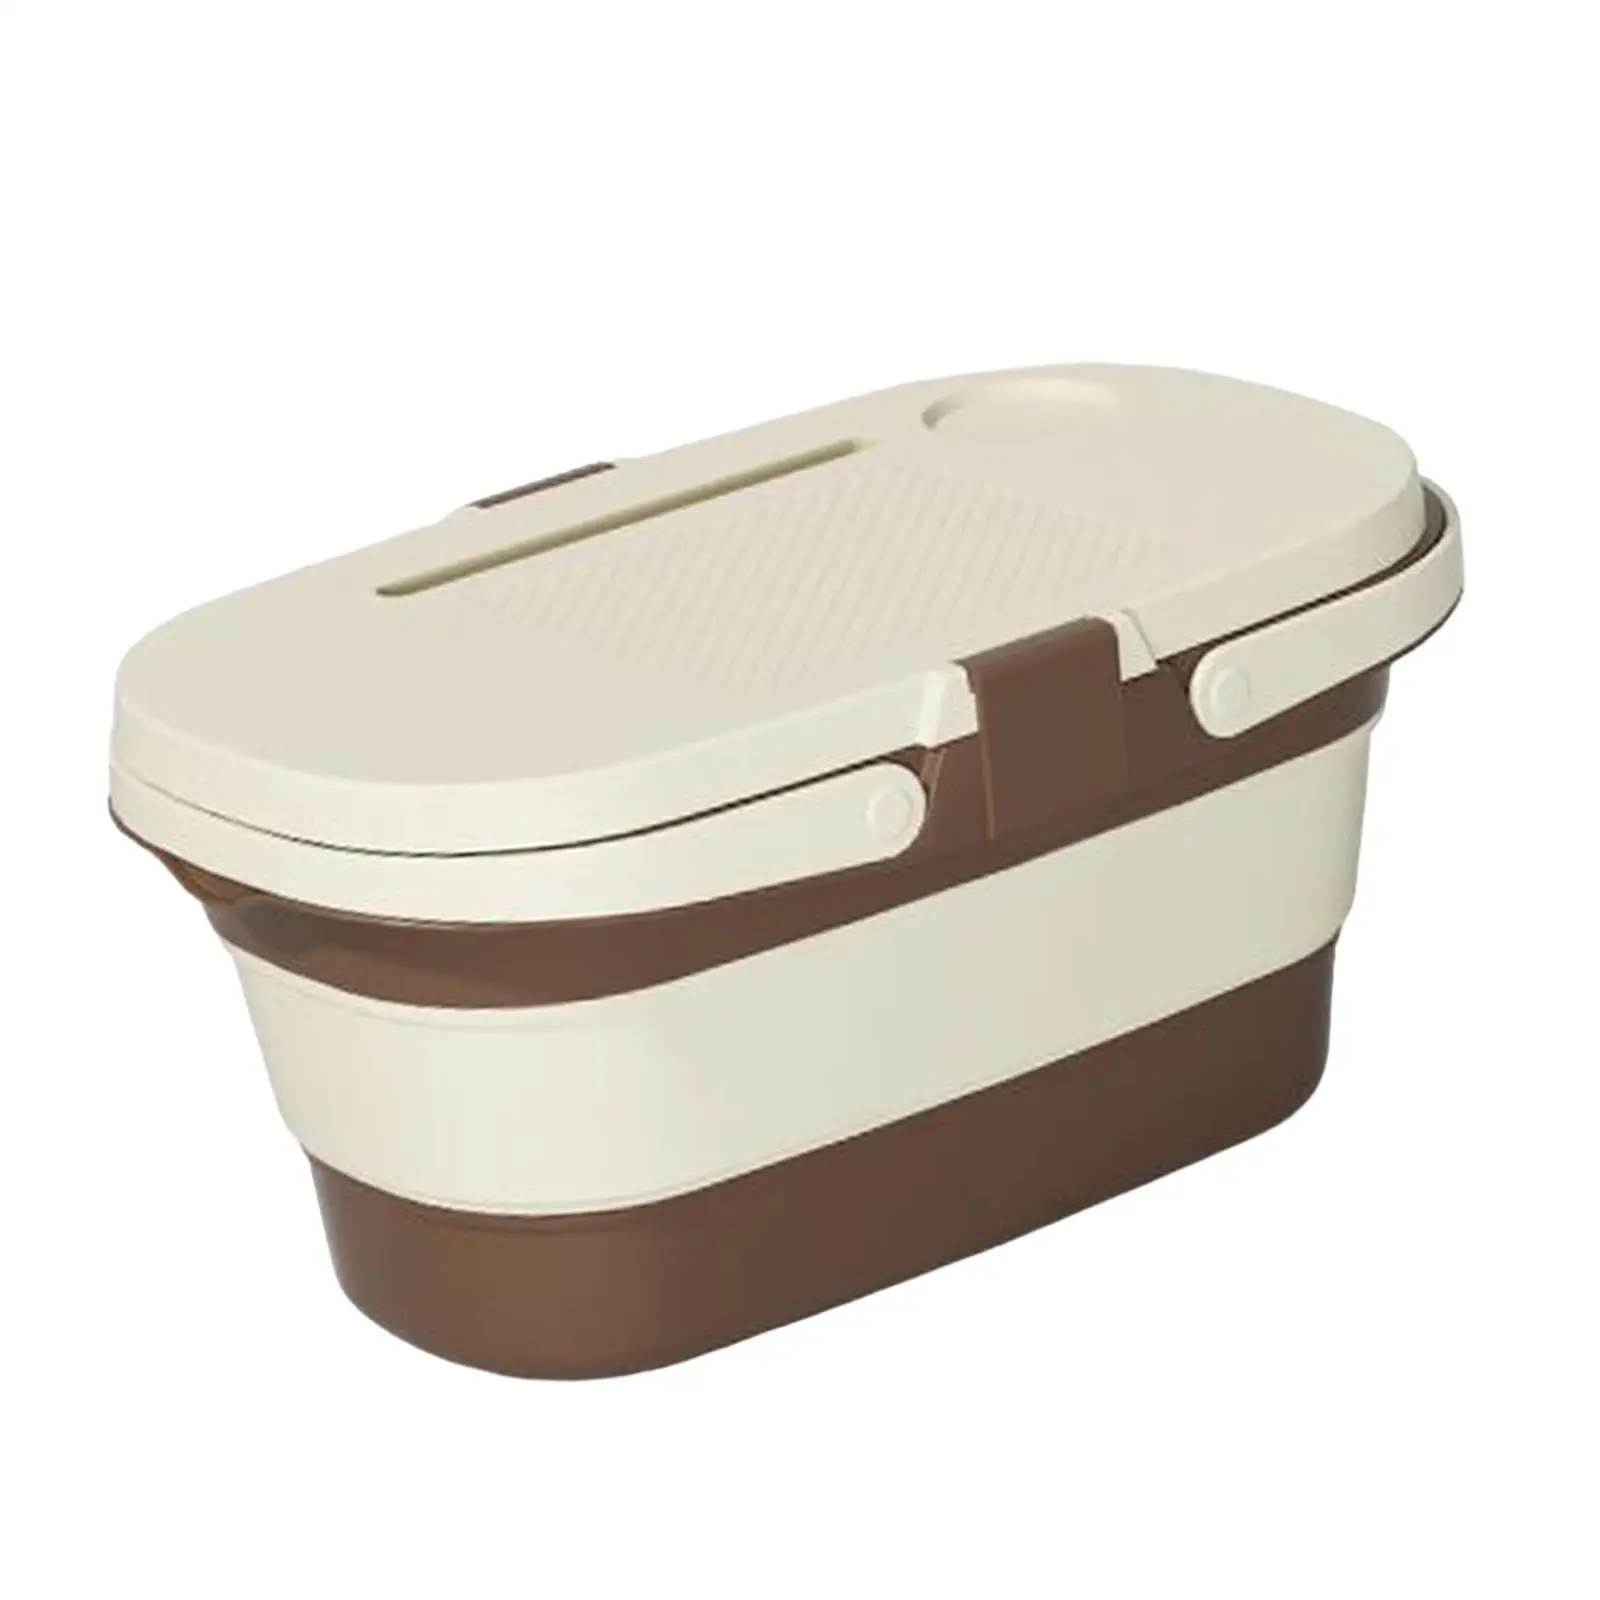 Collapsible Picnic Basket Multifunctional Water Bucket Storage Box with Lid and